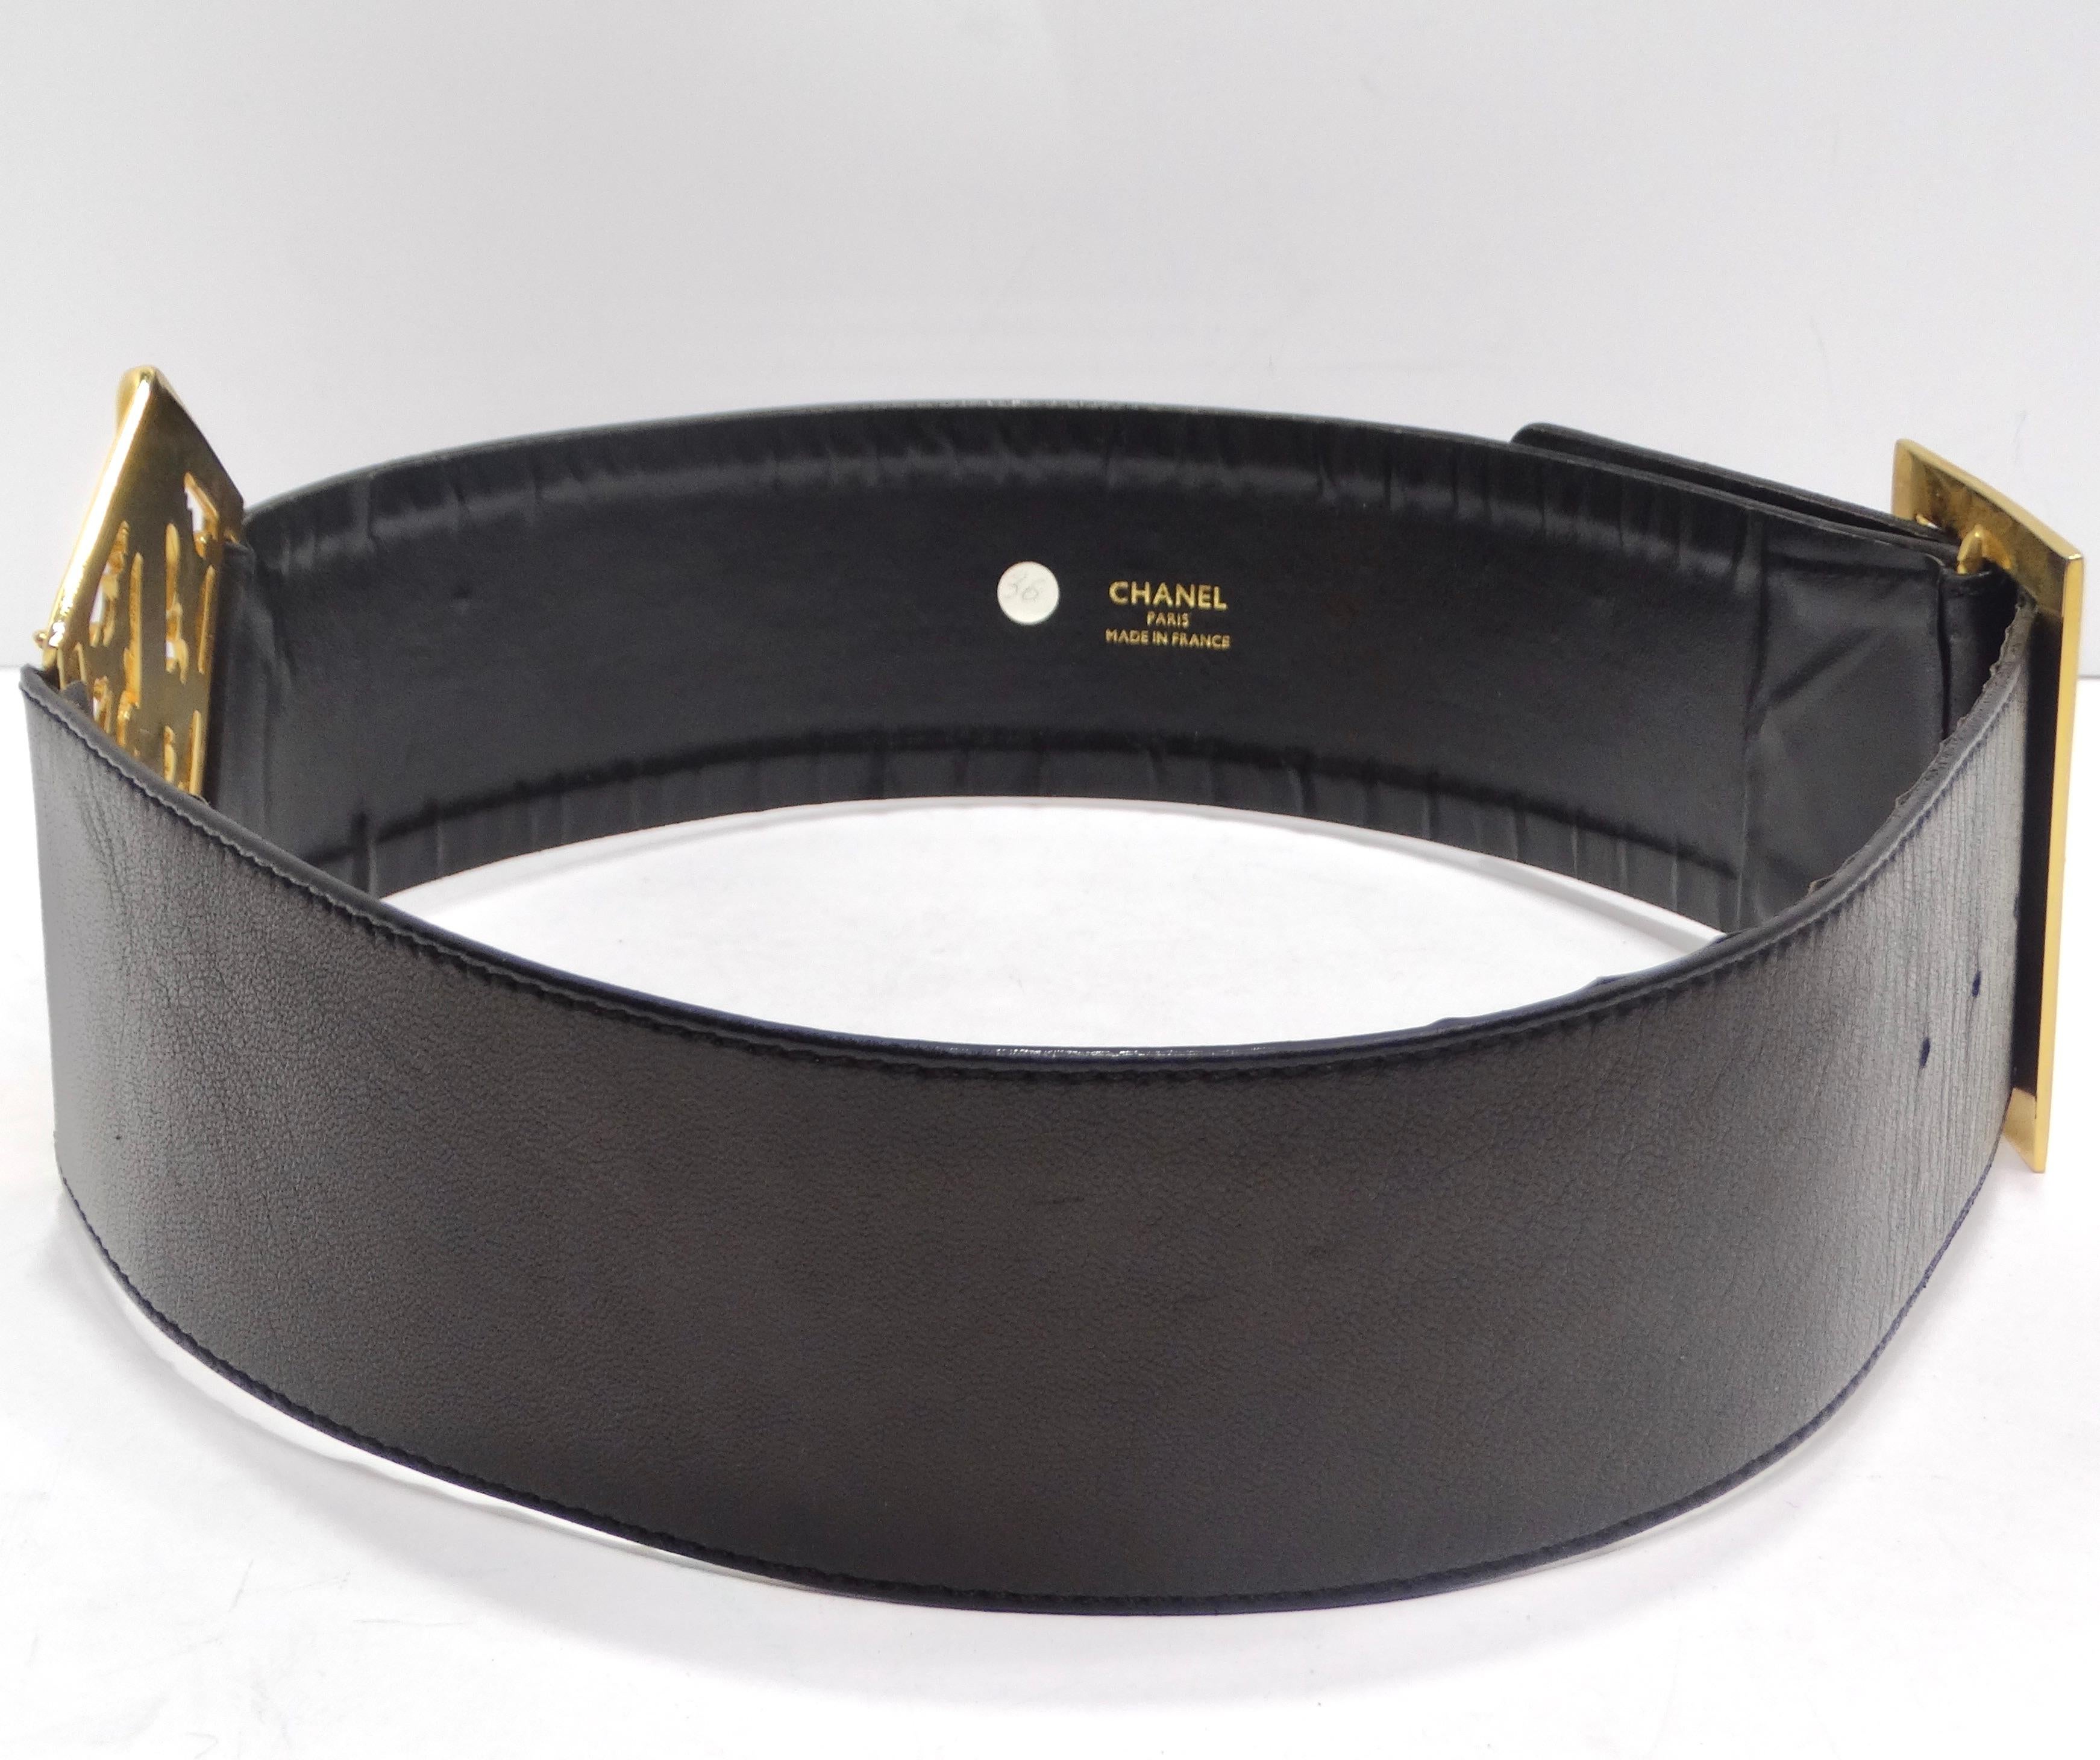 Chanel 1980s Black Leather 24k Gold-Plated Filigree Belt In Good Condition For Sale In Scottsdale, AZ